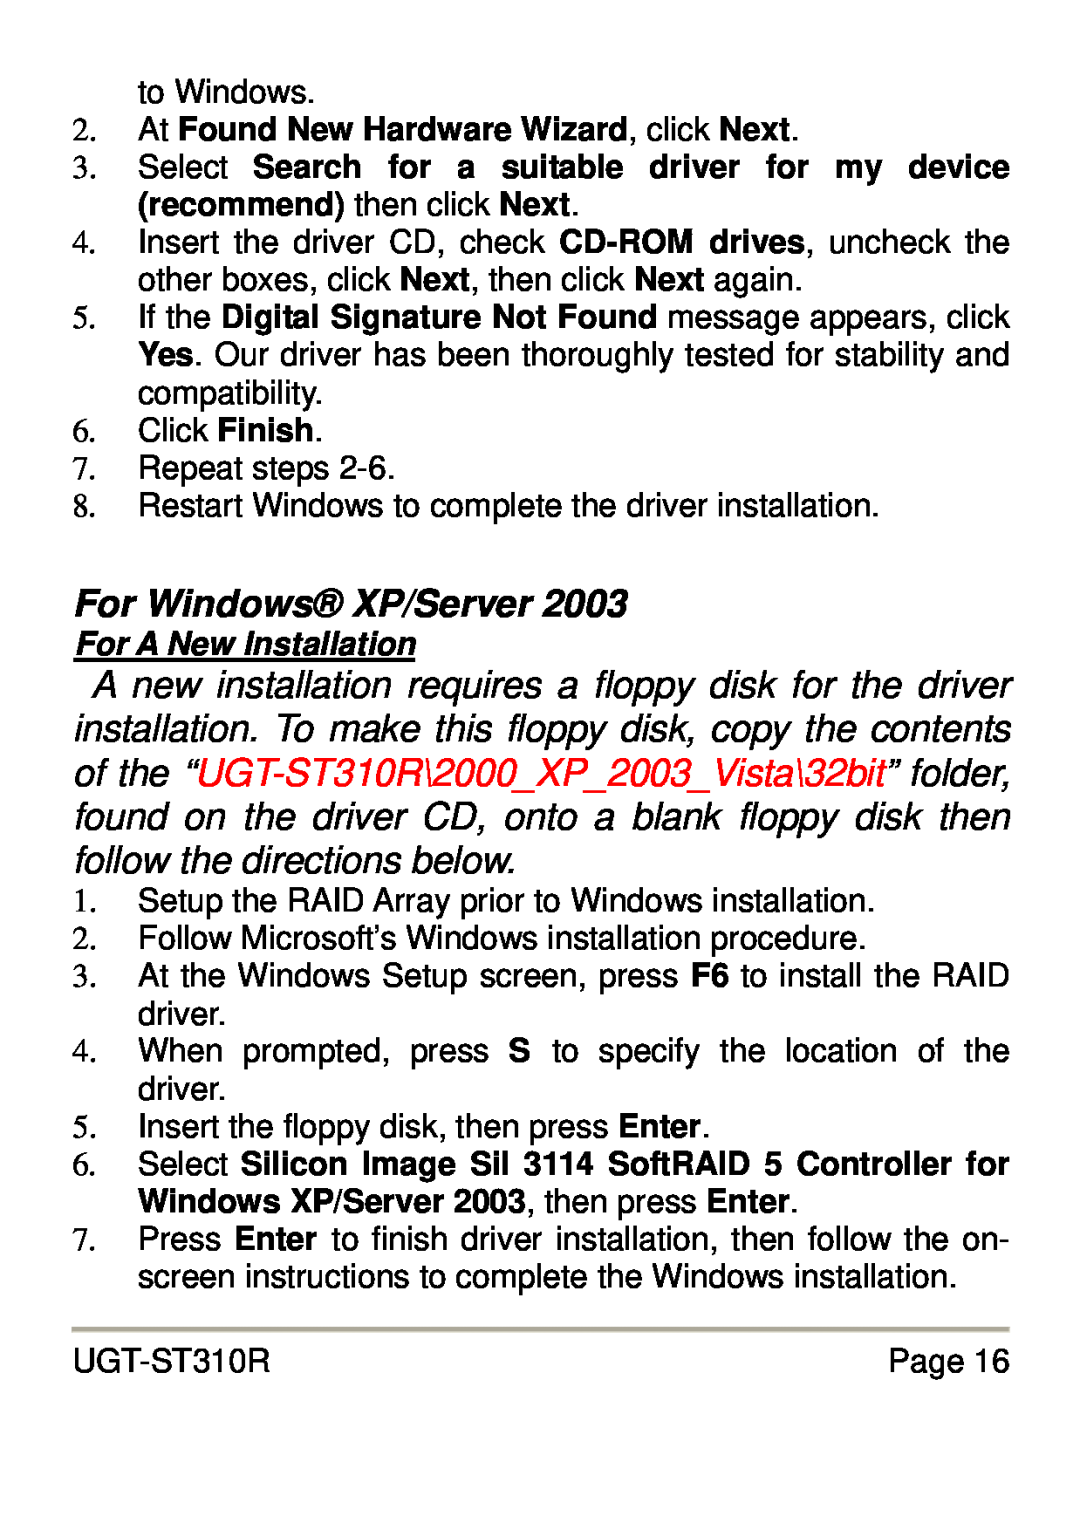 Vantec UGT-ST310R user manual For Windows XP/Server, At Found New Hardware Wizard, click Next, For A New Installation 